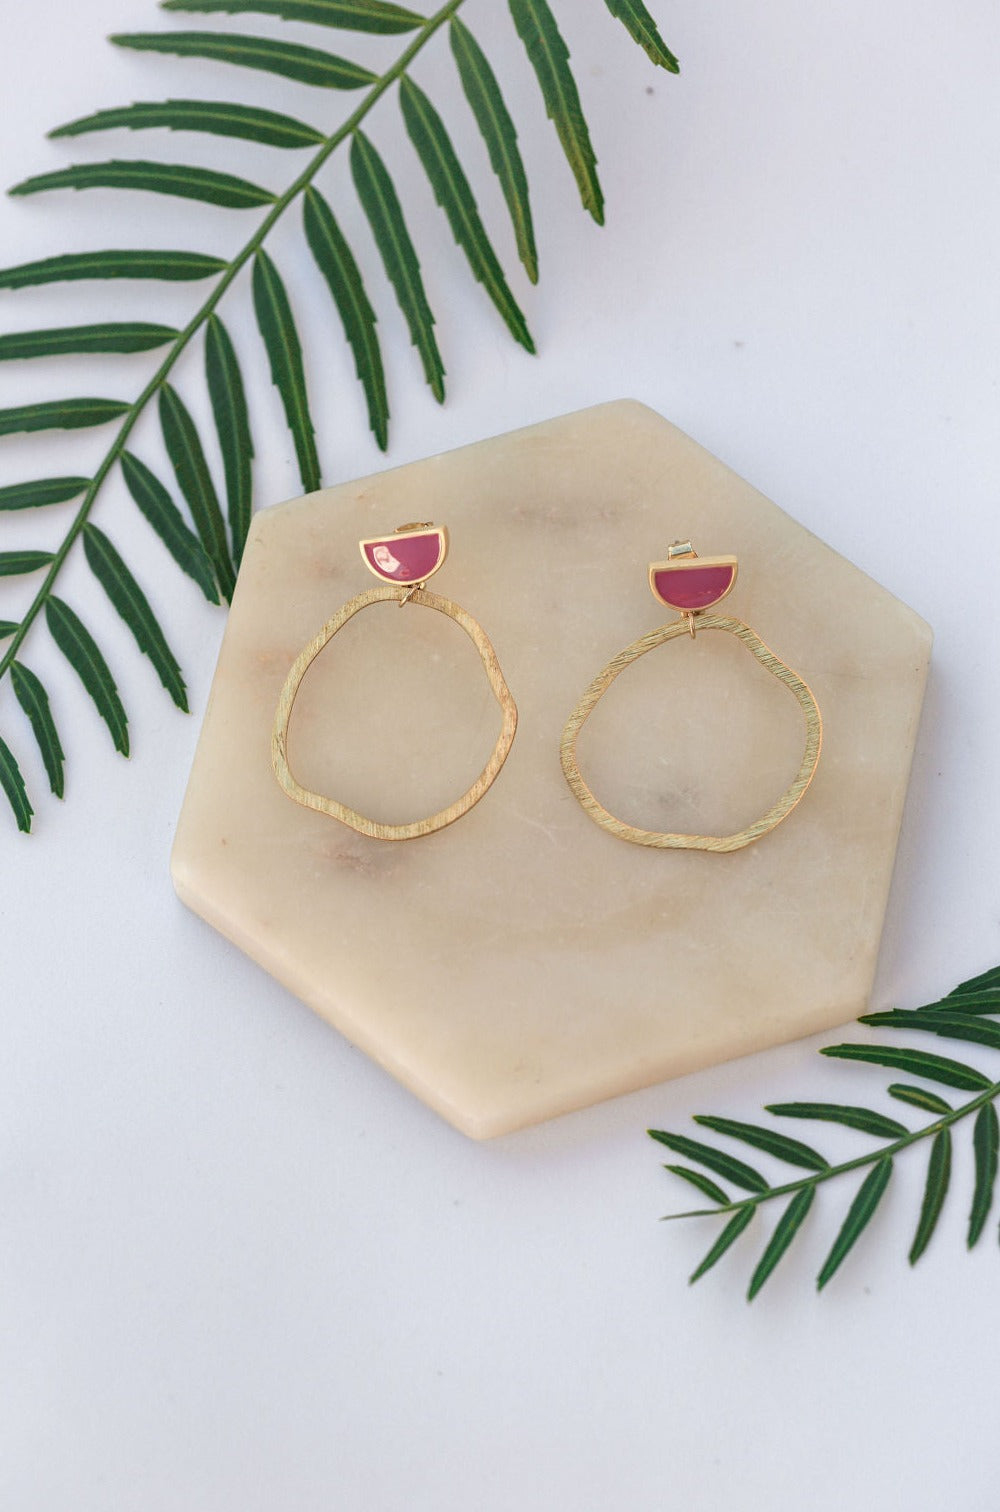 Abstract Hoop Earrings in Gold and Pink